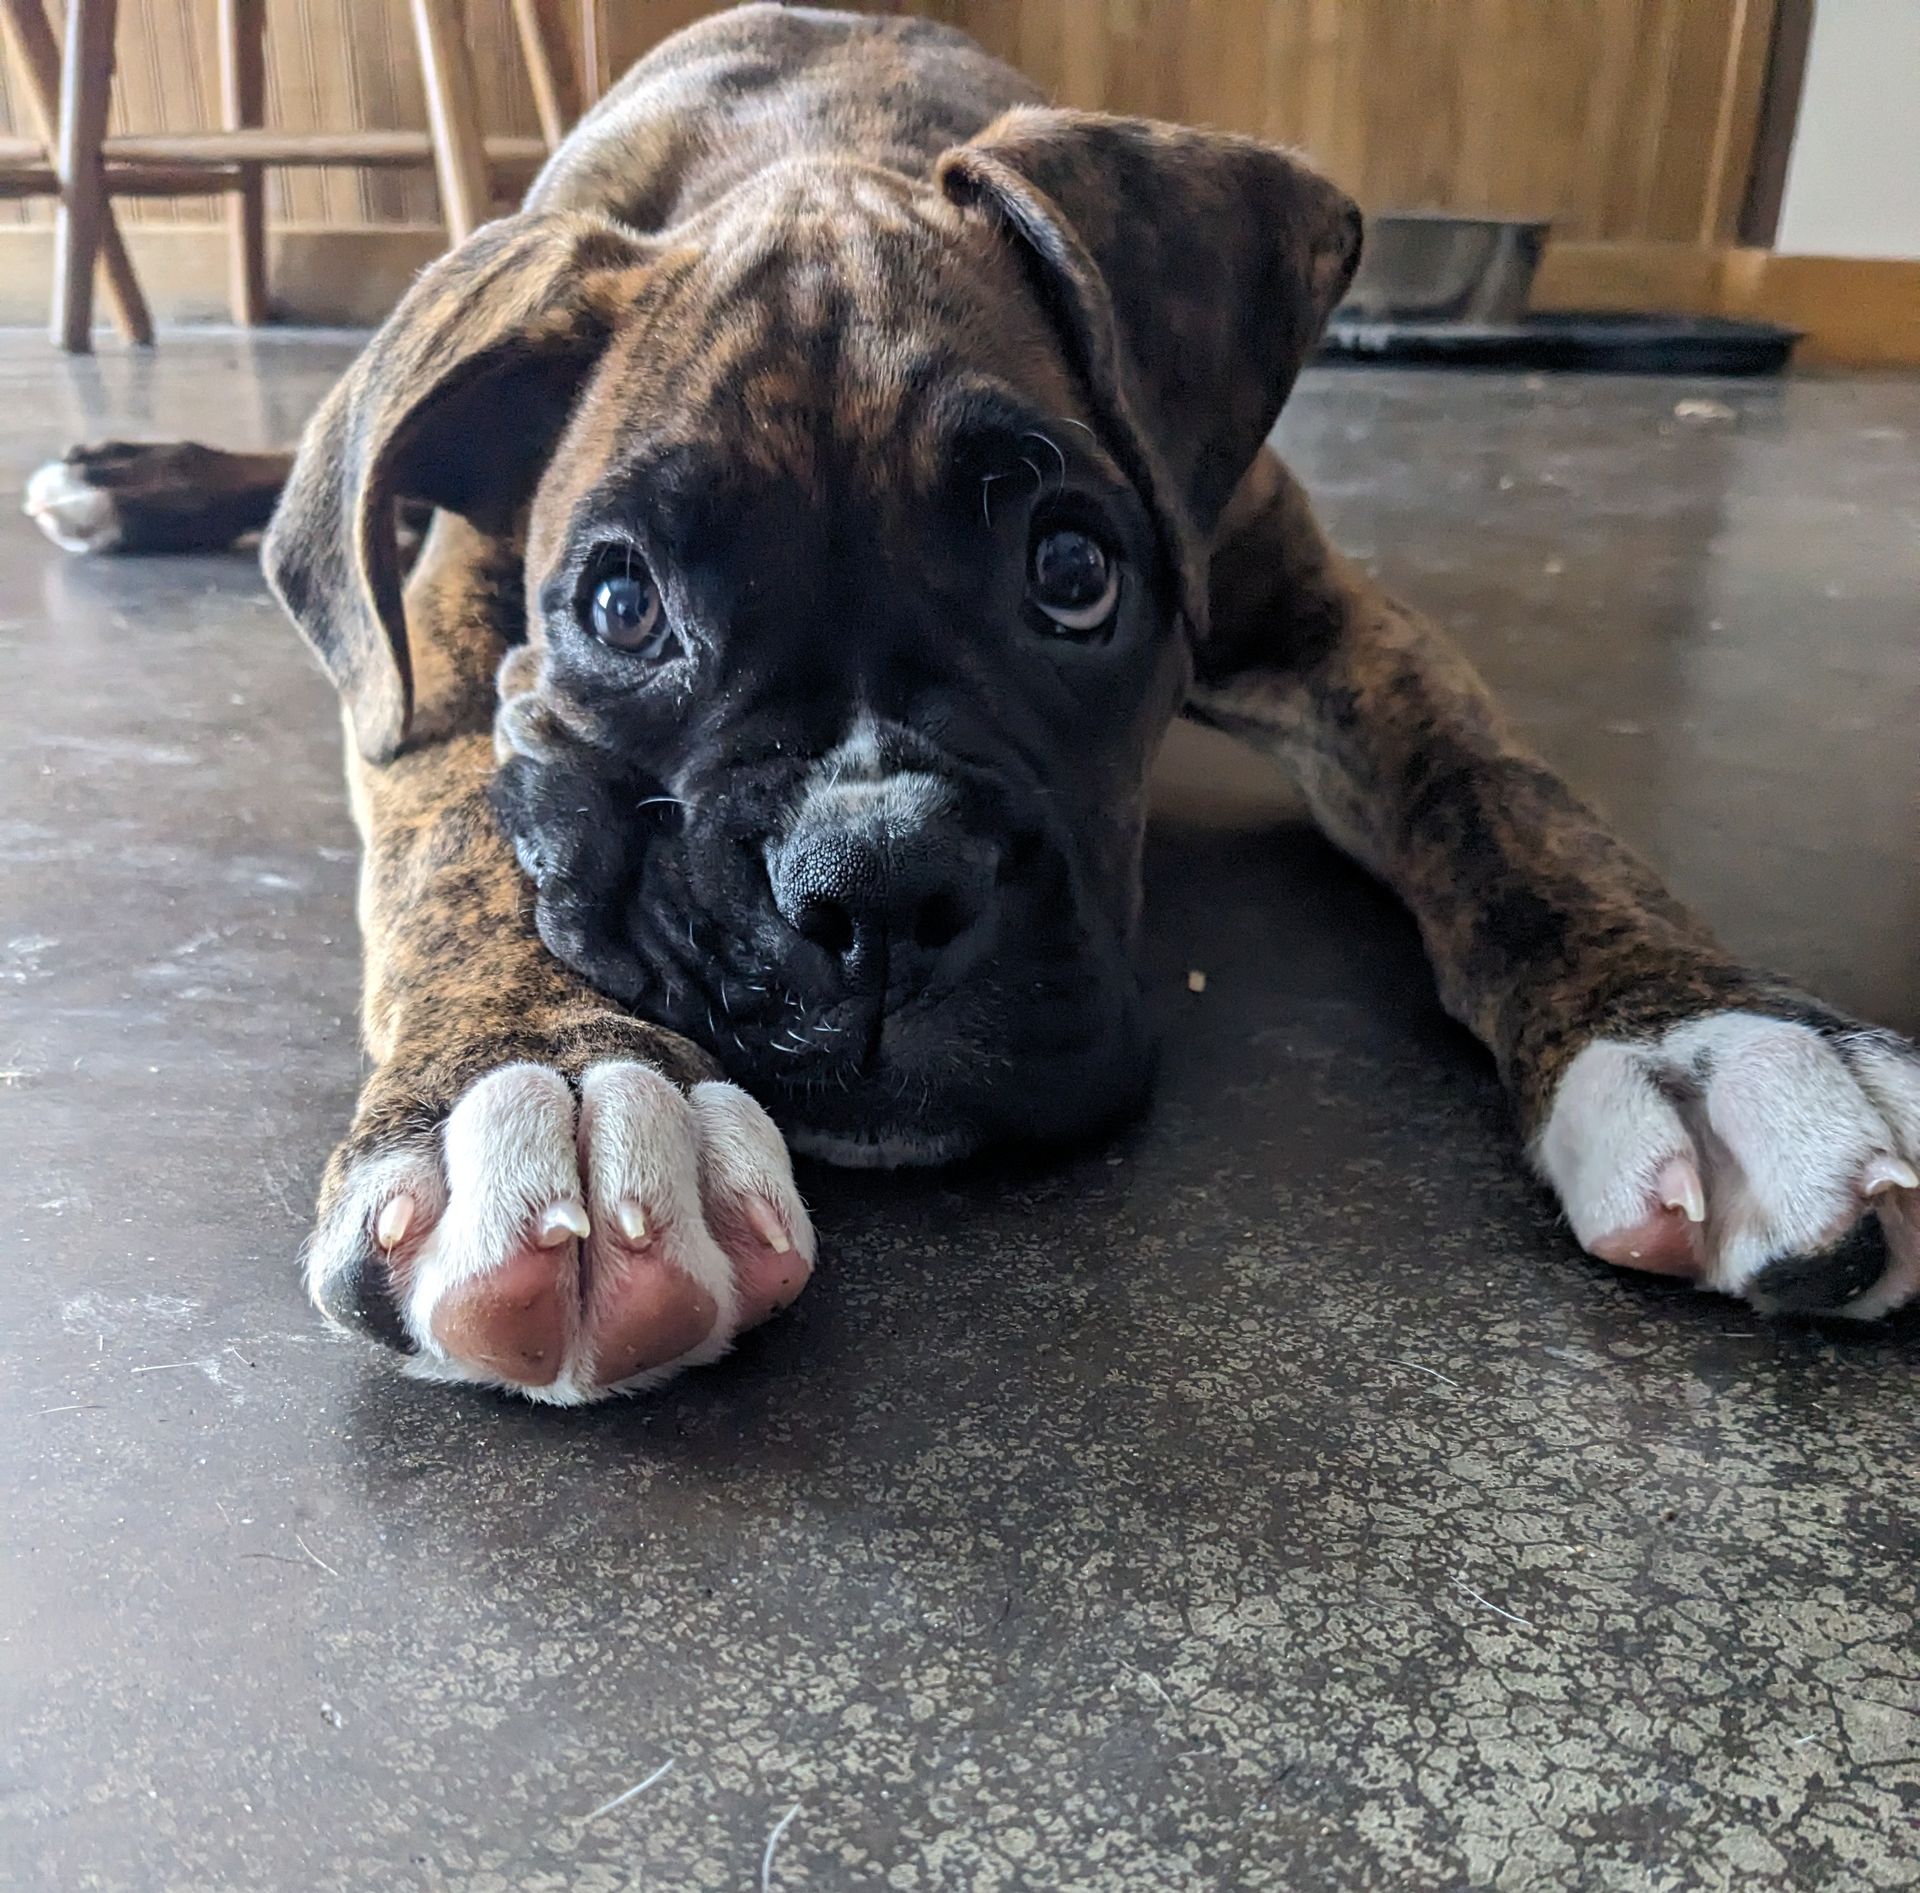 Kiah the boxer puppy laying on the floor with her head between her outstretched paws.